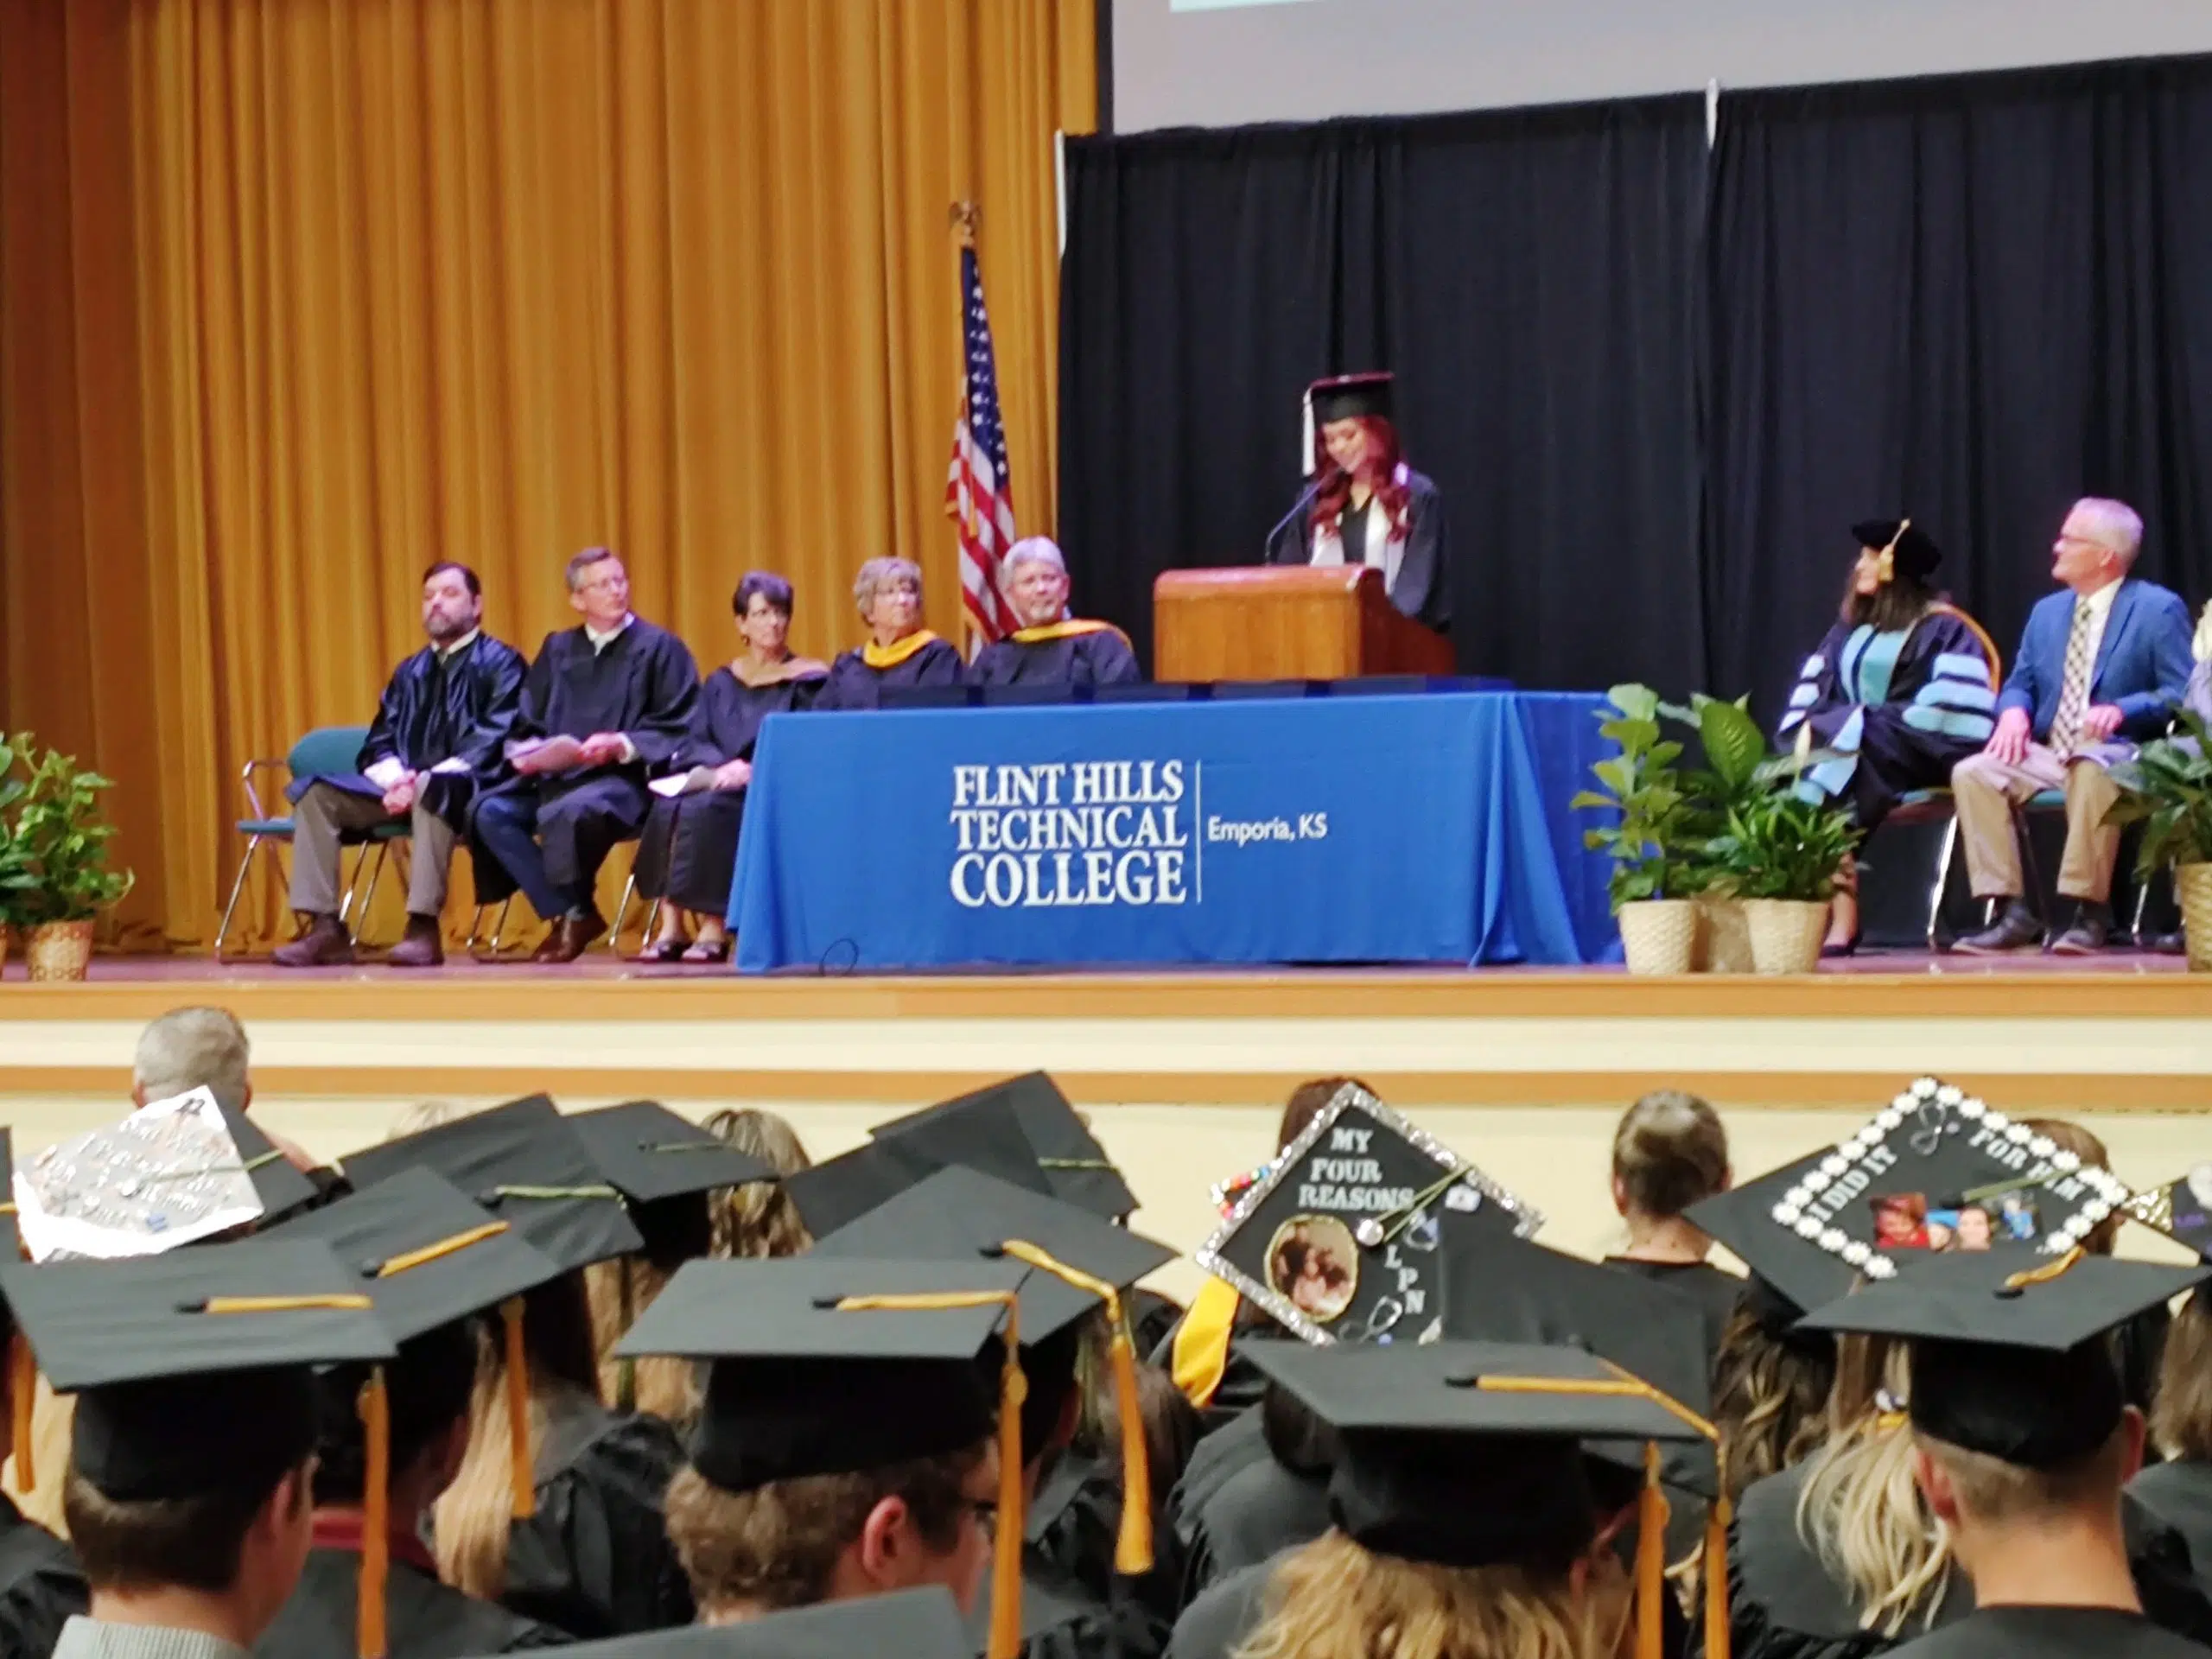 Flint Hills Technical College honors more than 200 graduates during 2022 Spring Commencement activities Sunday